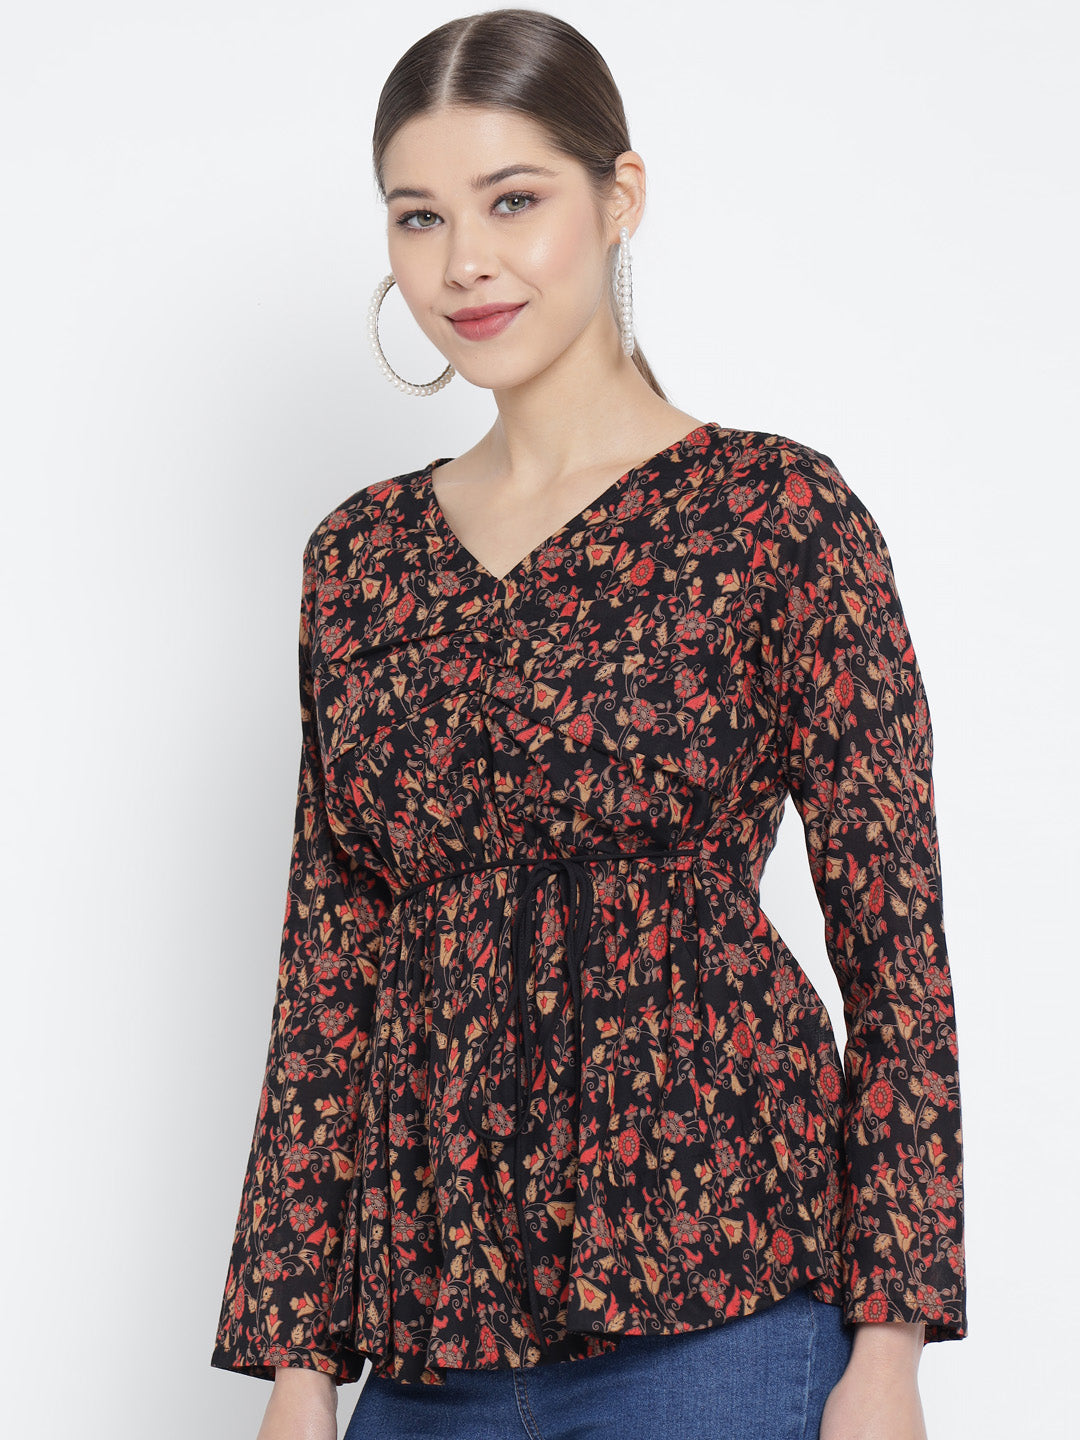 YASH GALLERY Women's Cotton Gathered Style Floral Printed Regular Top (Black)